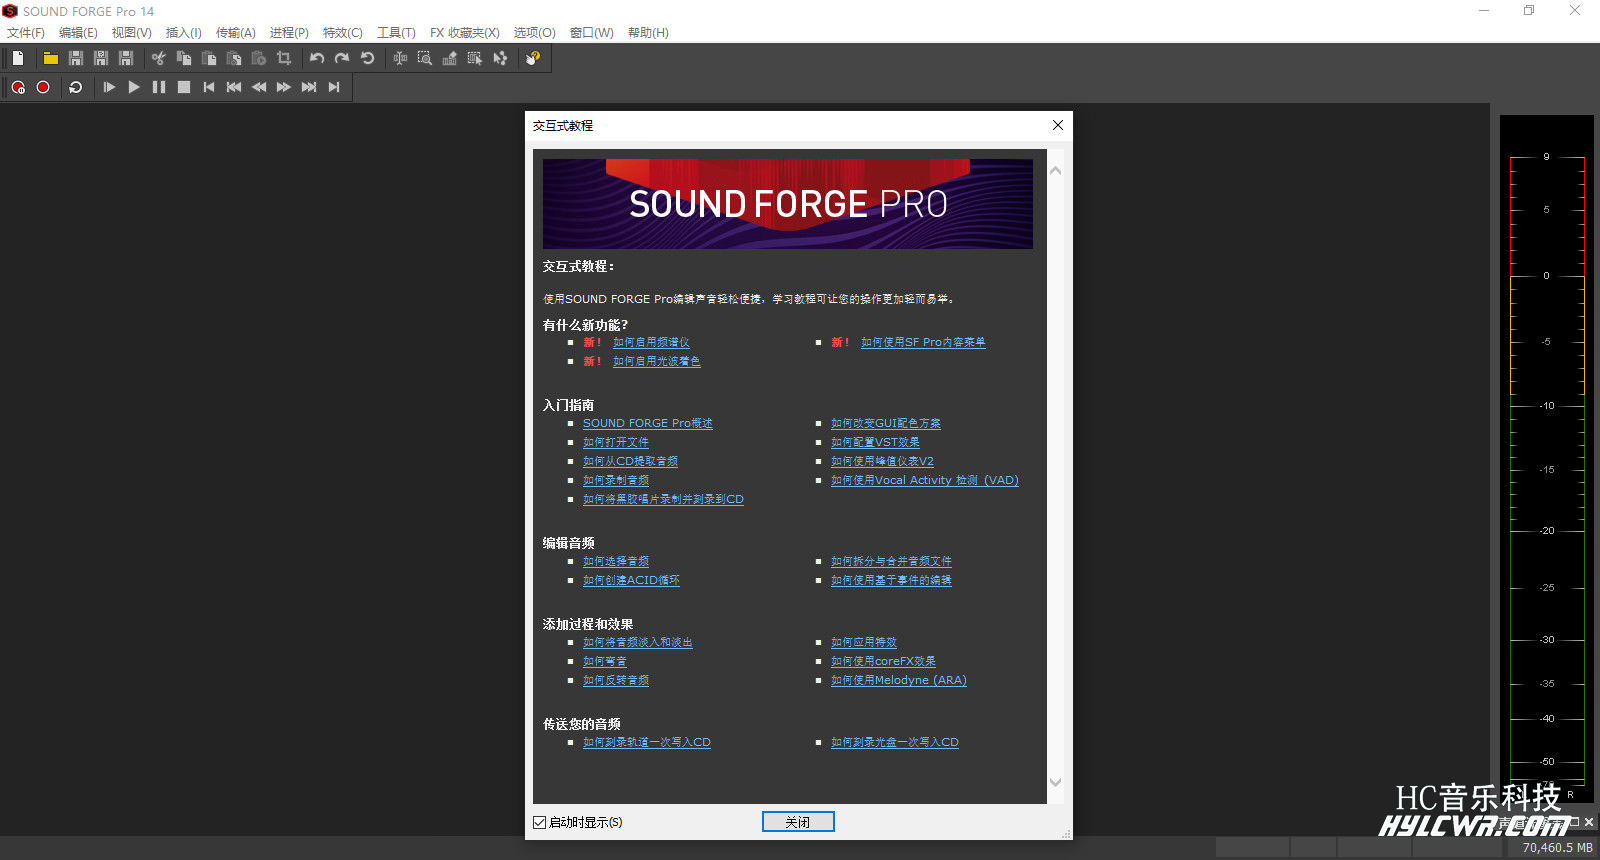 Magix Sound Forge Pro 14.0.0.112（Win&macOS）插图7